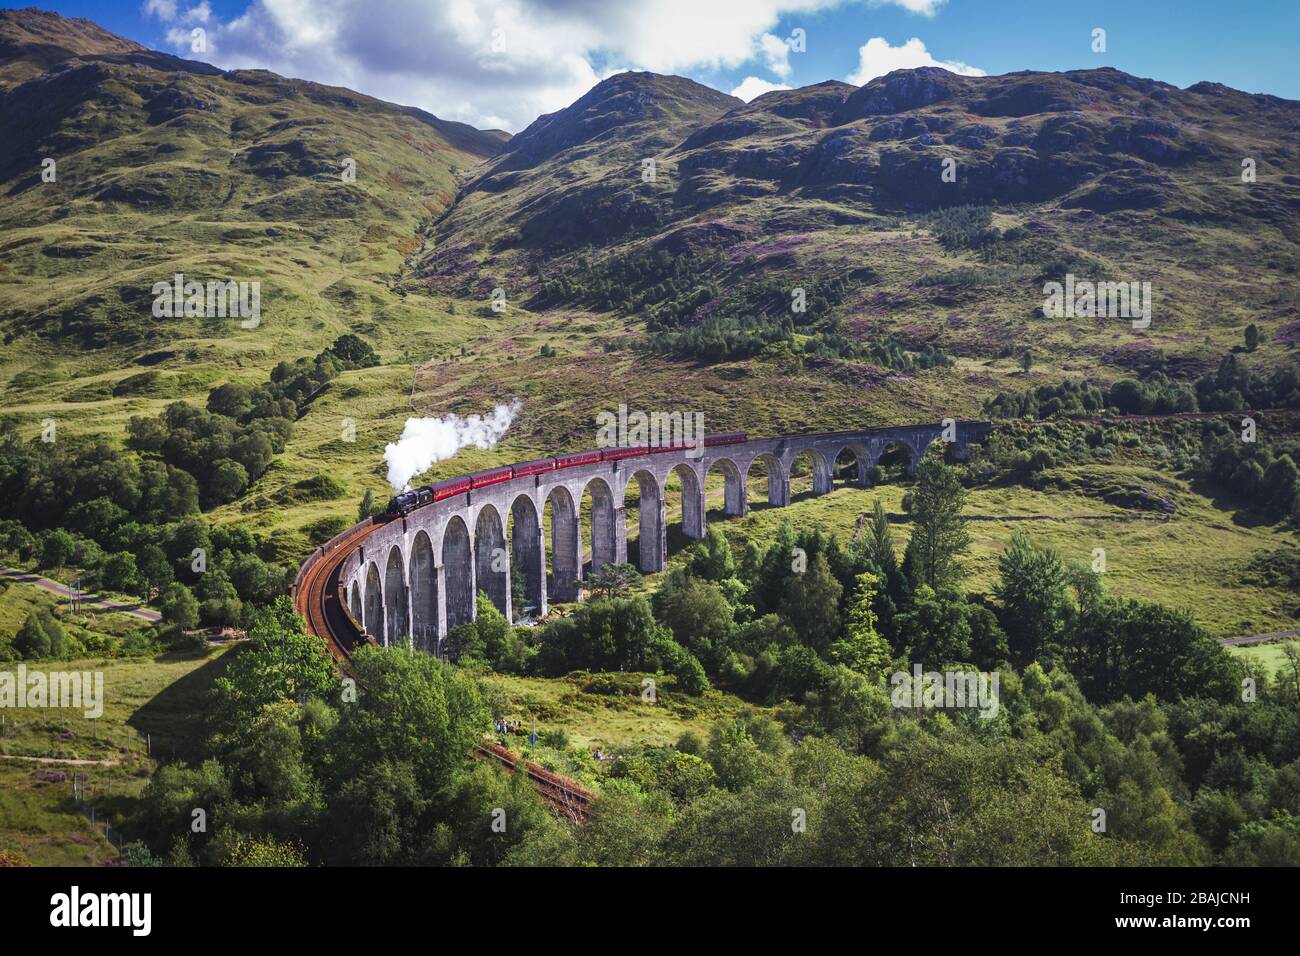 Glenfinnan Railway Viaduct in Scotland with the Jacobite steam train passing over. Stock Photo